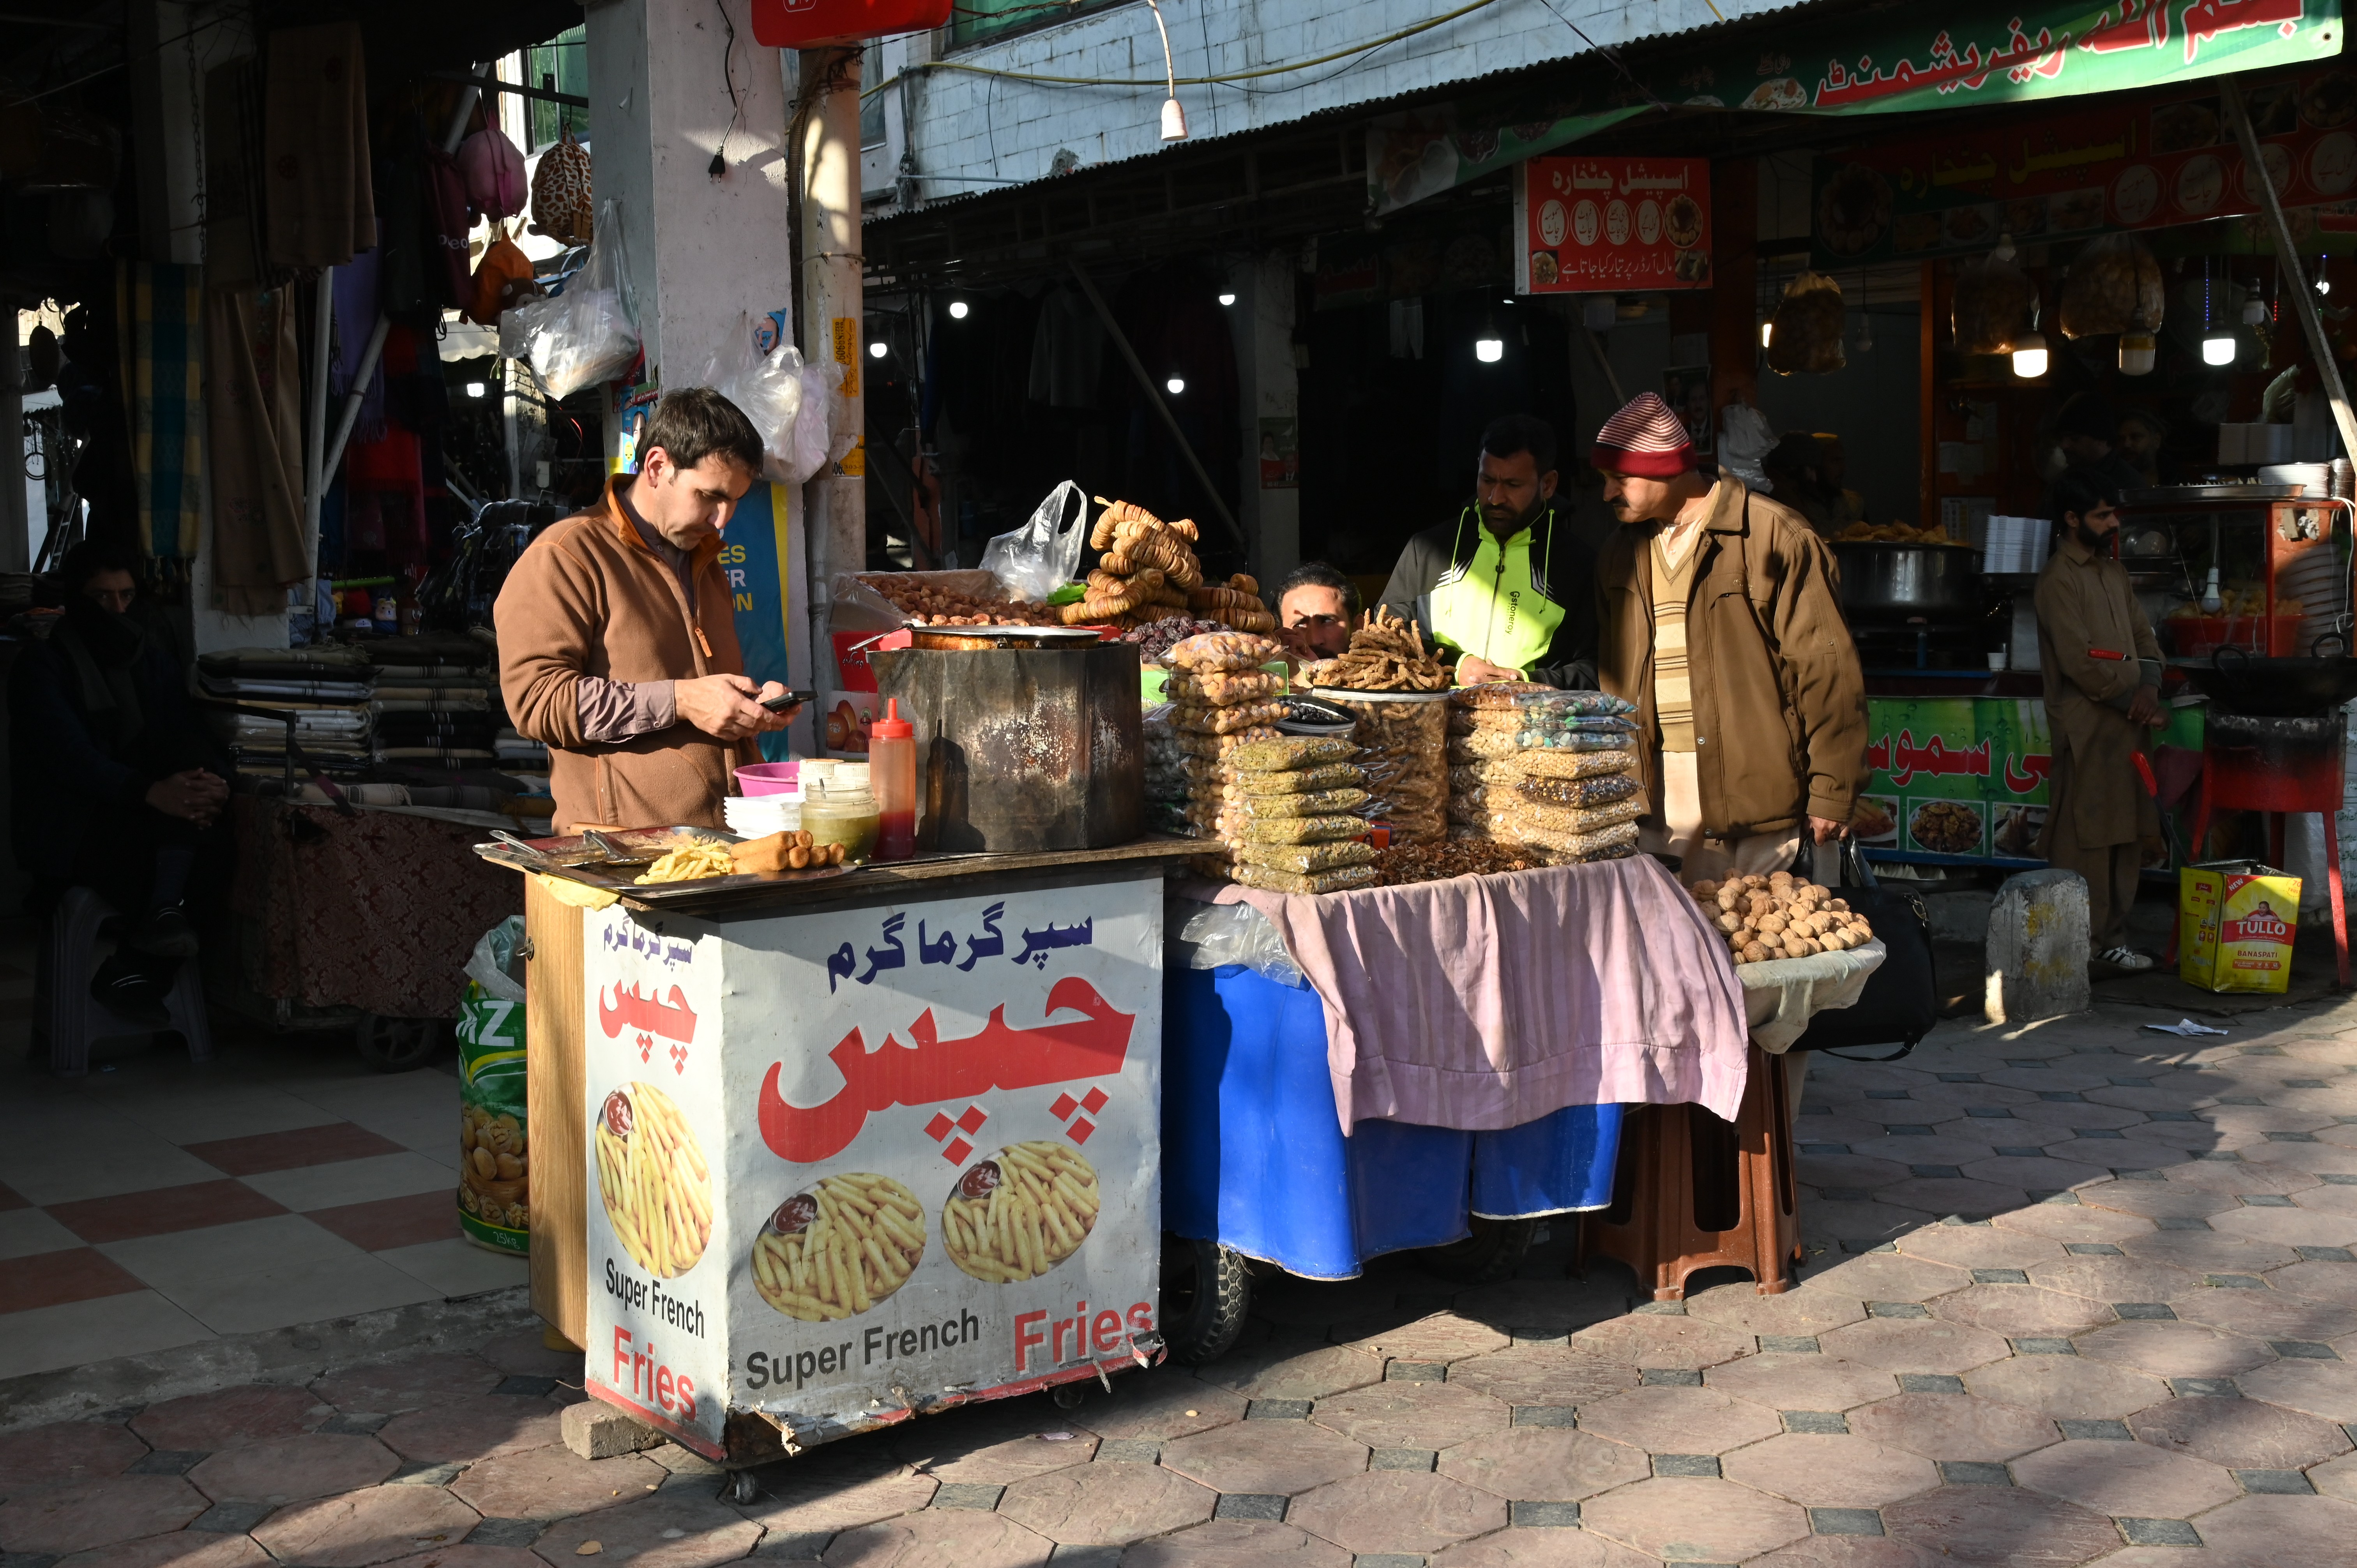 A man selling french fries at his stall